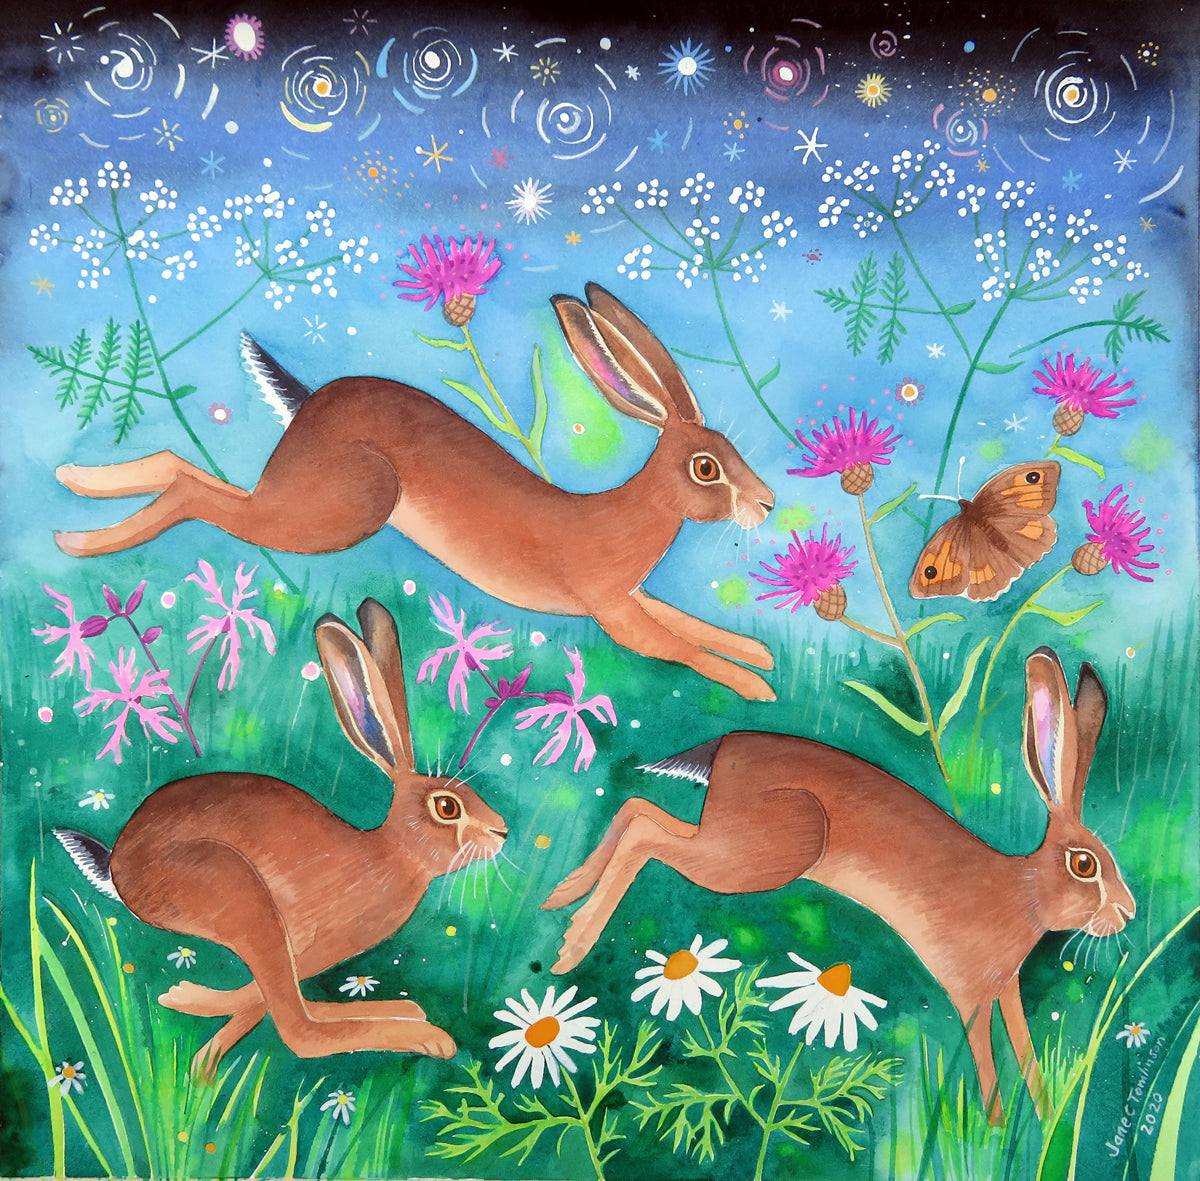 Meadow brown hares - painting by Jane Tomlinson